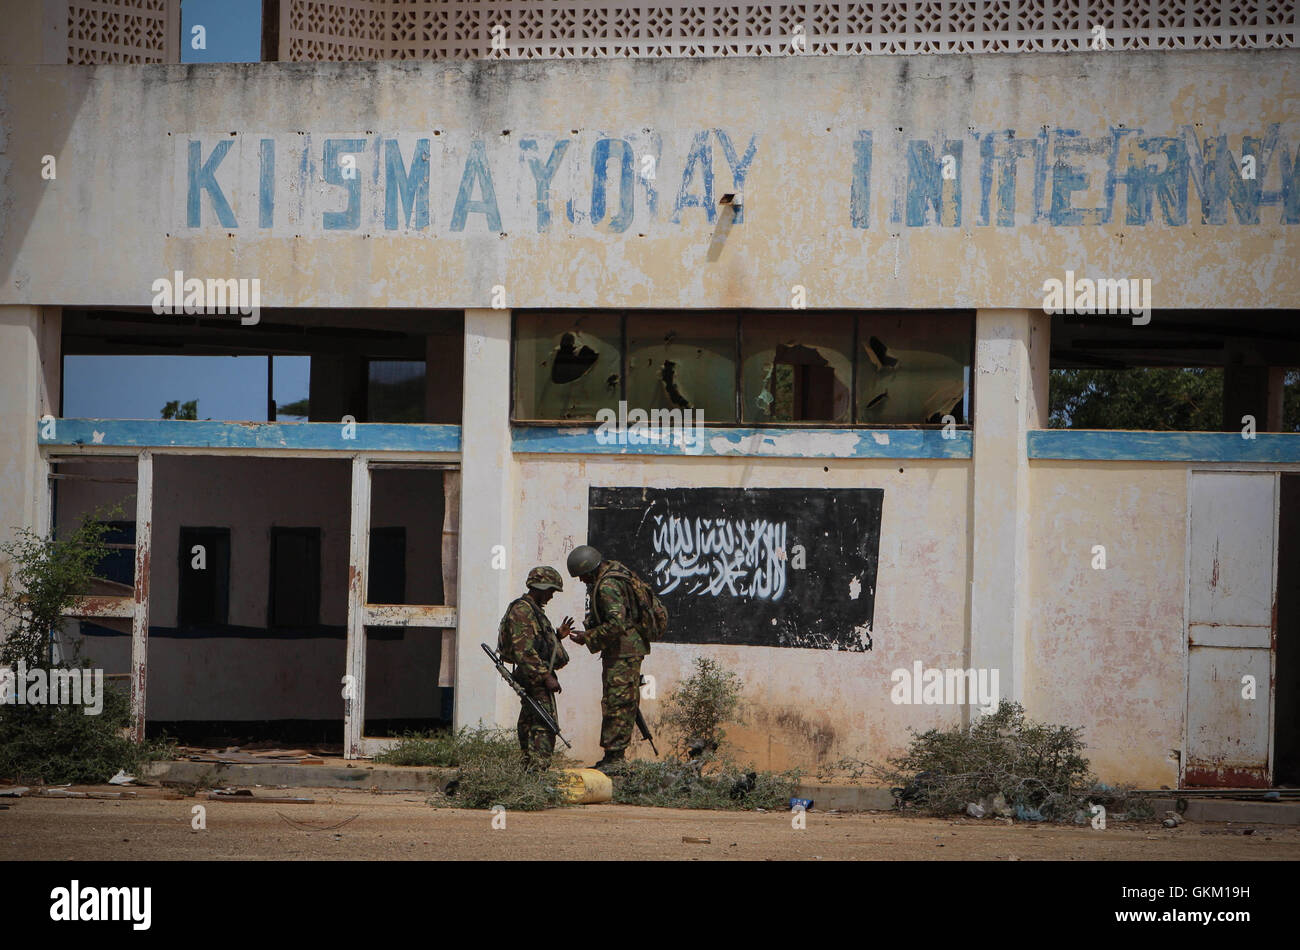 SOMALIA, Kismayo: In a handout photograph released by the African Union-United Nations Information Support Team 02 October, soldiers of the Kenyan Contingent serving with the African Union Mission in Somalia (AMISOM) stand in front of the black flag of the Al Qaeda-affiliated extremist group Al Shabaab painted on the wall of Kismayo Airport. Kenyan AMISOM troops moved into and through Kismayo, the hitherto last major urban stronghold of tAl Shabaab, on their way to the airport without a shot being fired following a two-month operation to liberate towns and villages across southern Somalia and  Stock Photo